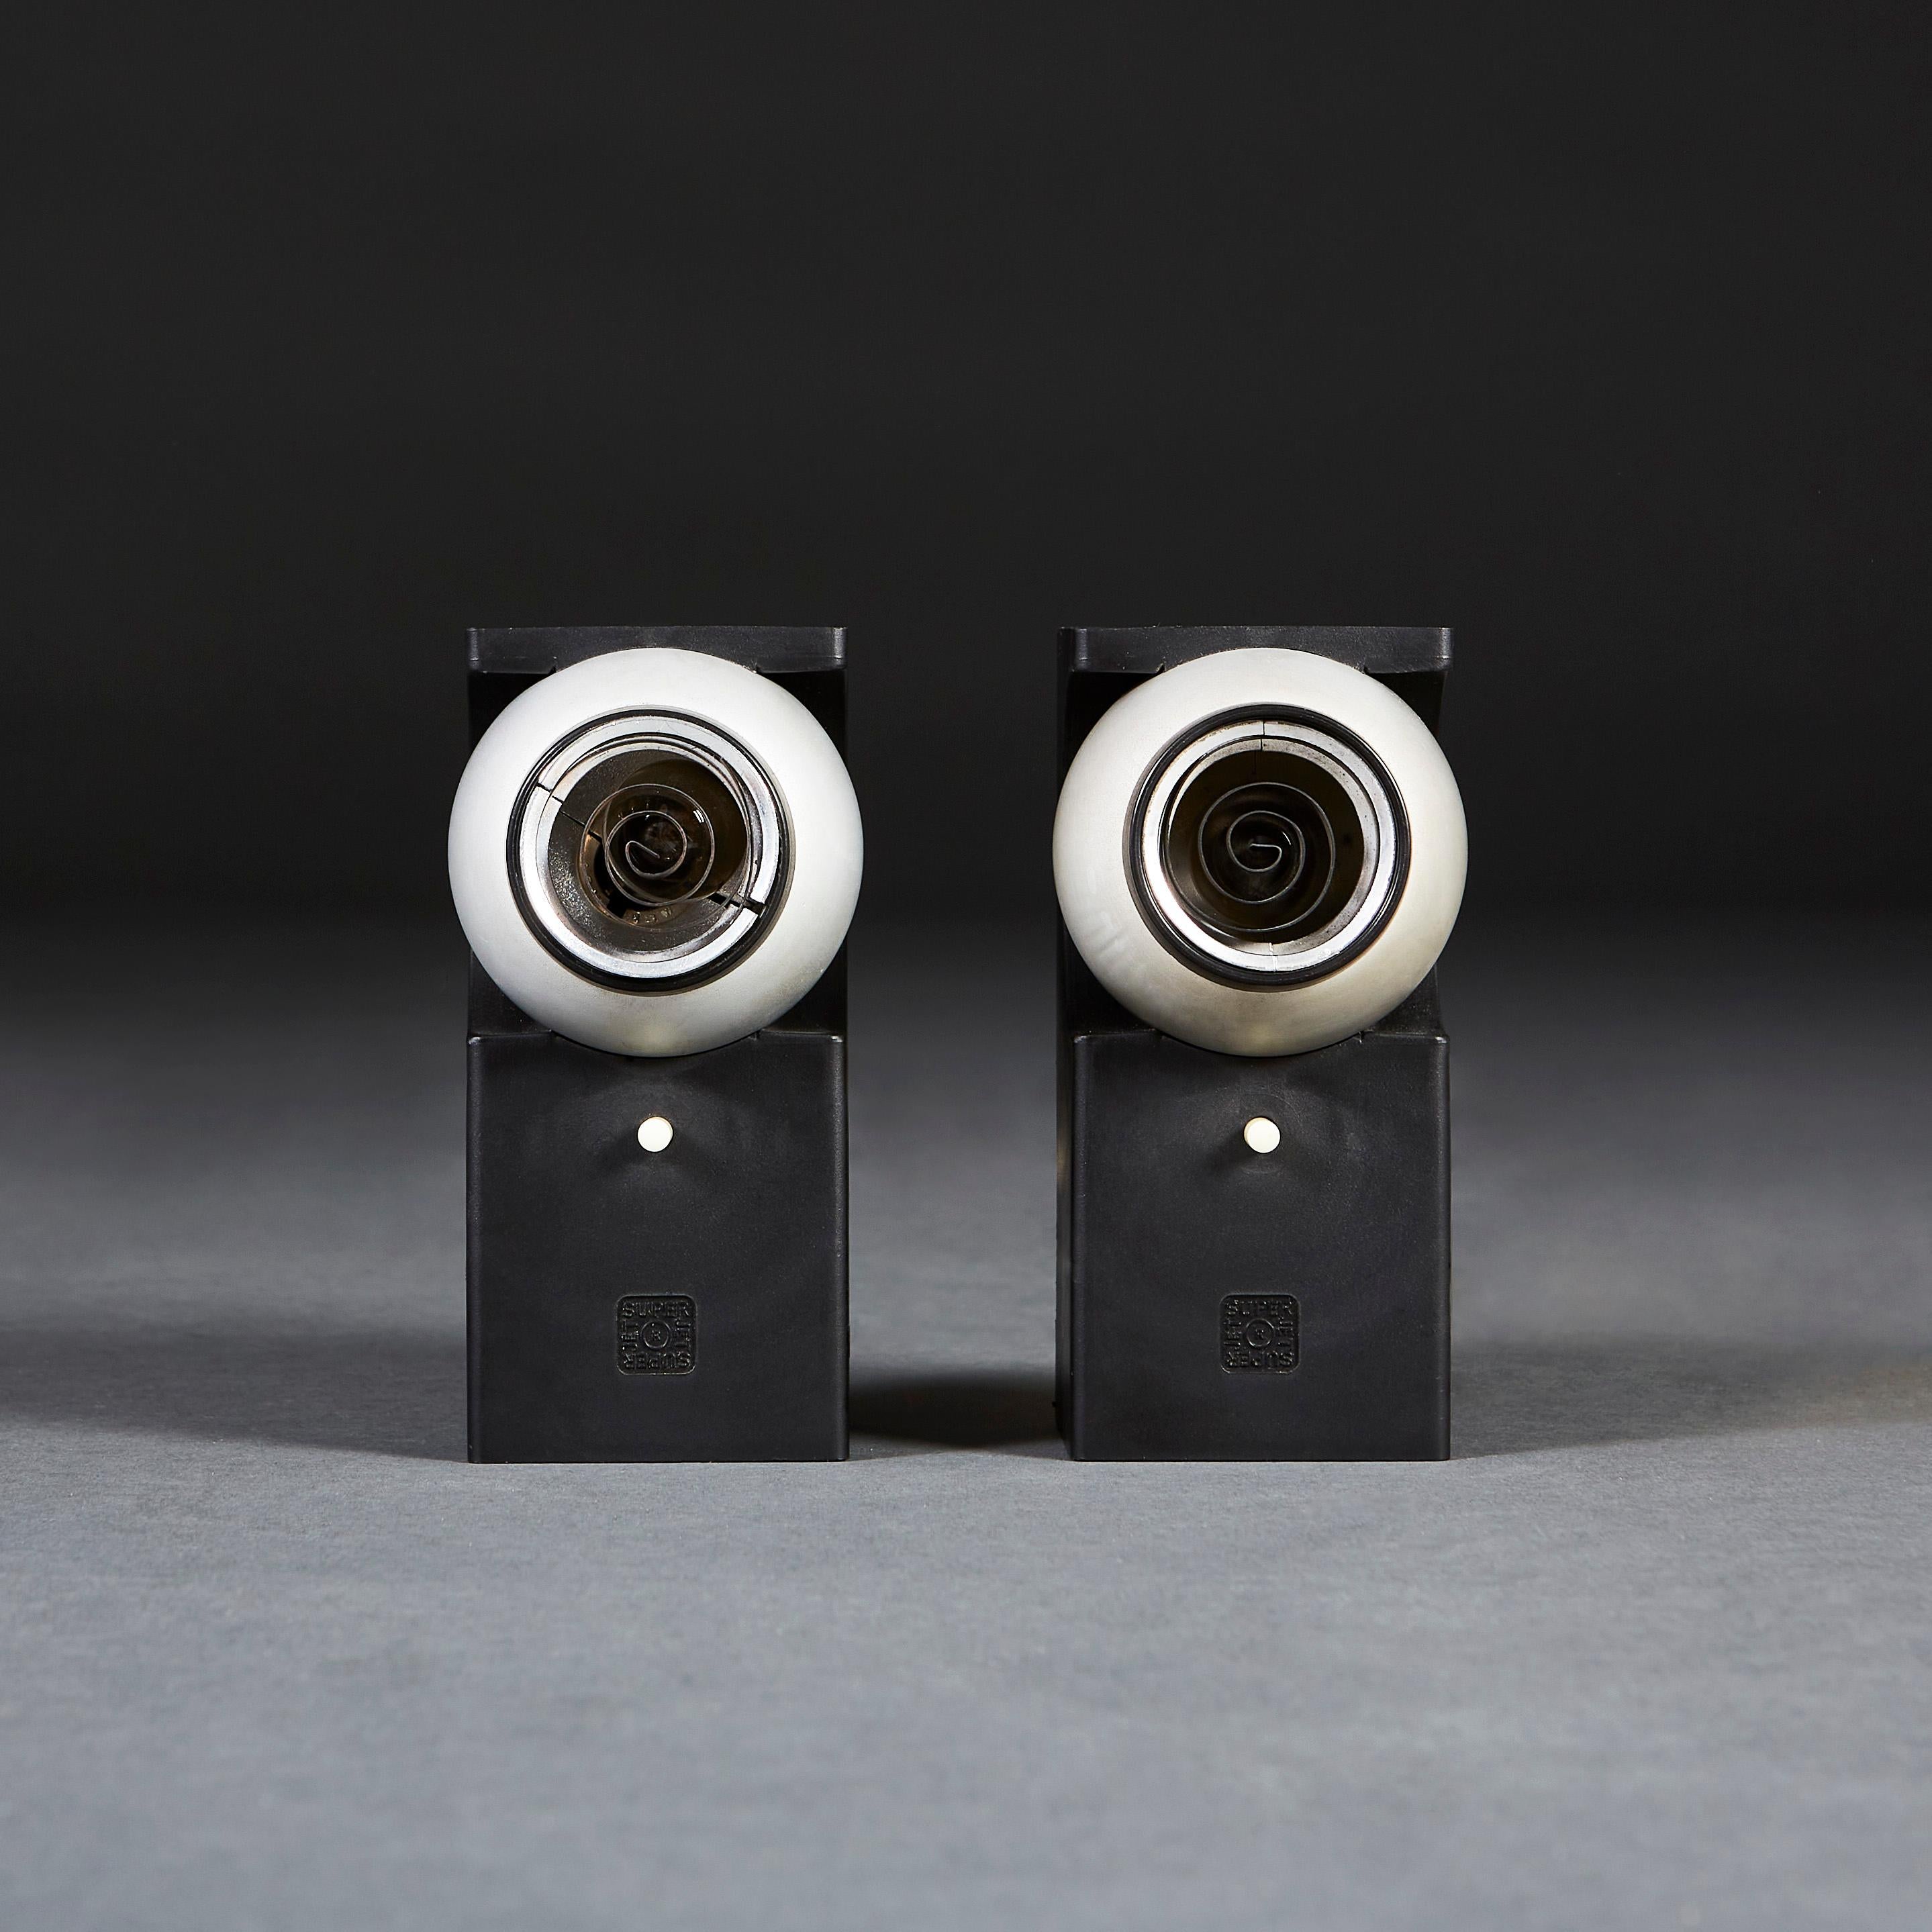 A pair of Superjet spotlights, designed by Robert Heritage for Concord Lighting International Ltd. The Superjet low-voltage reading light with moulded black polypropylene body and rotating anodized aluminum head with spiraling metal covers. Winner